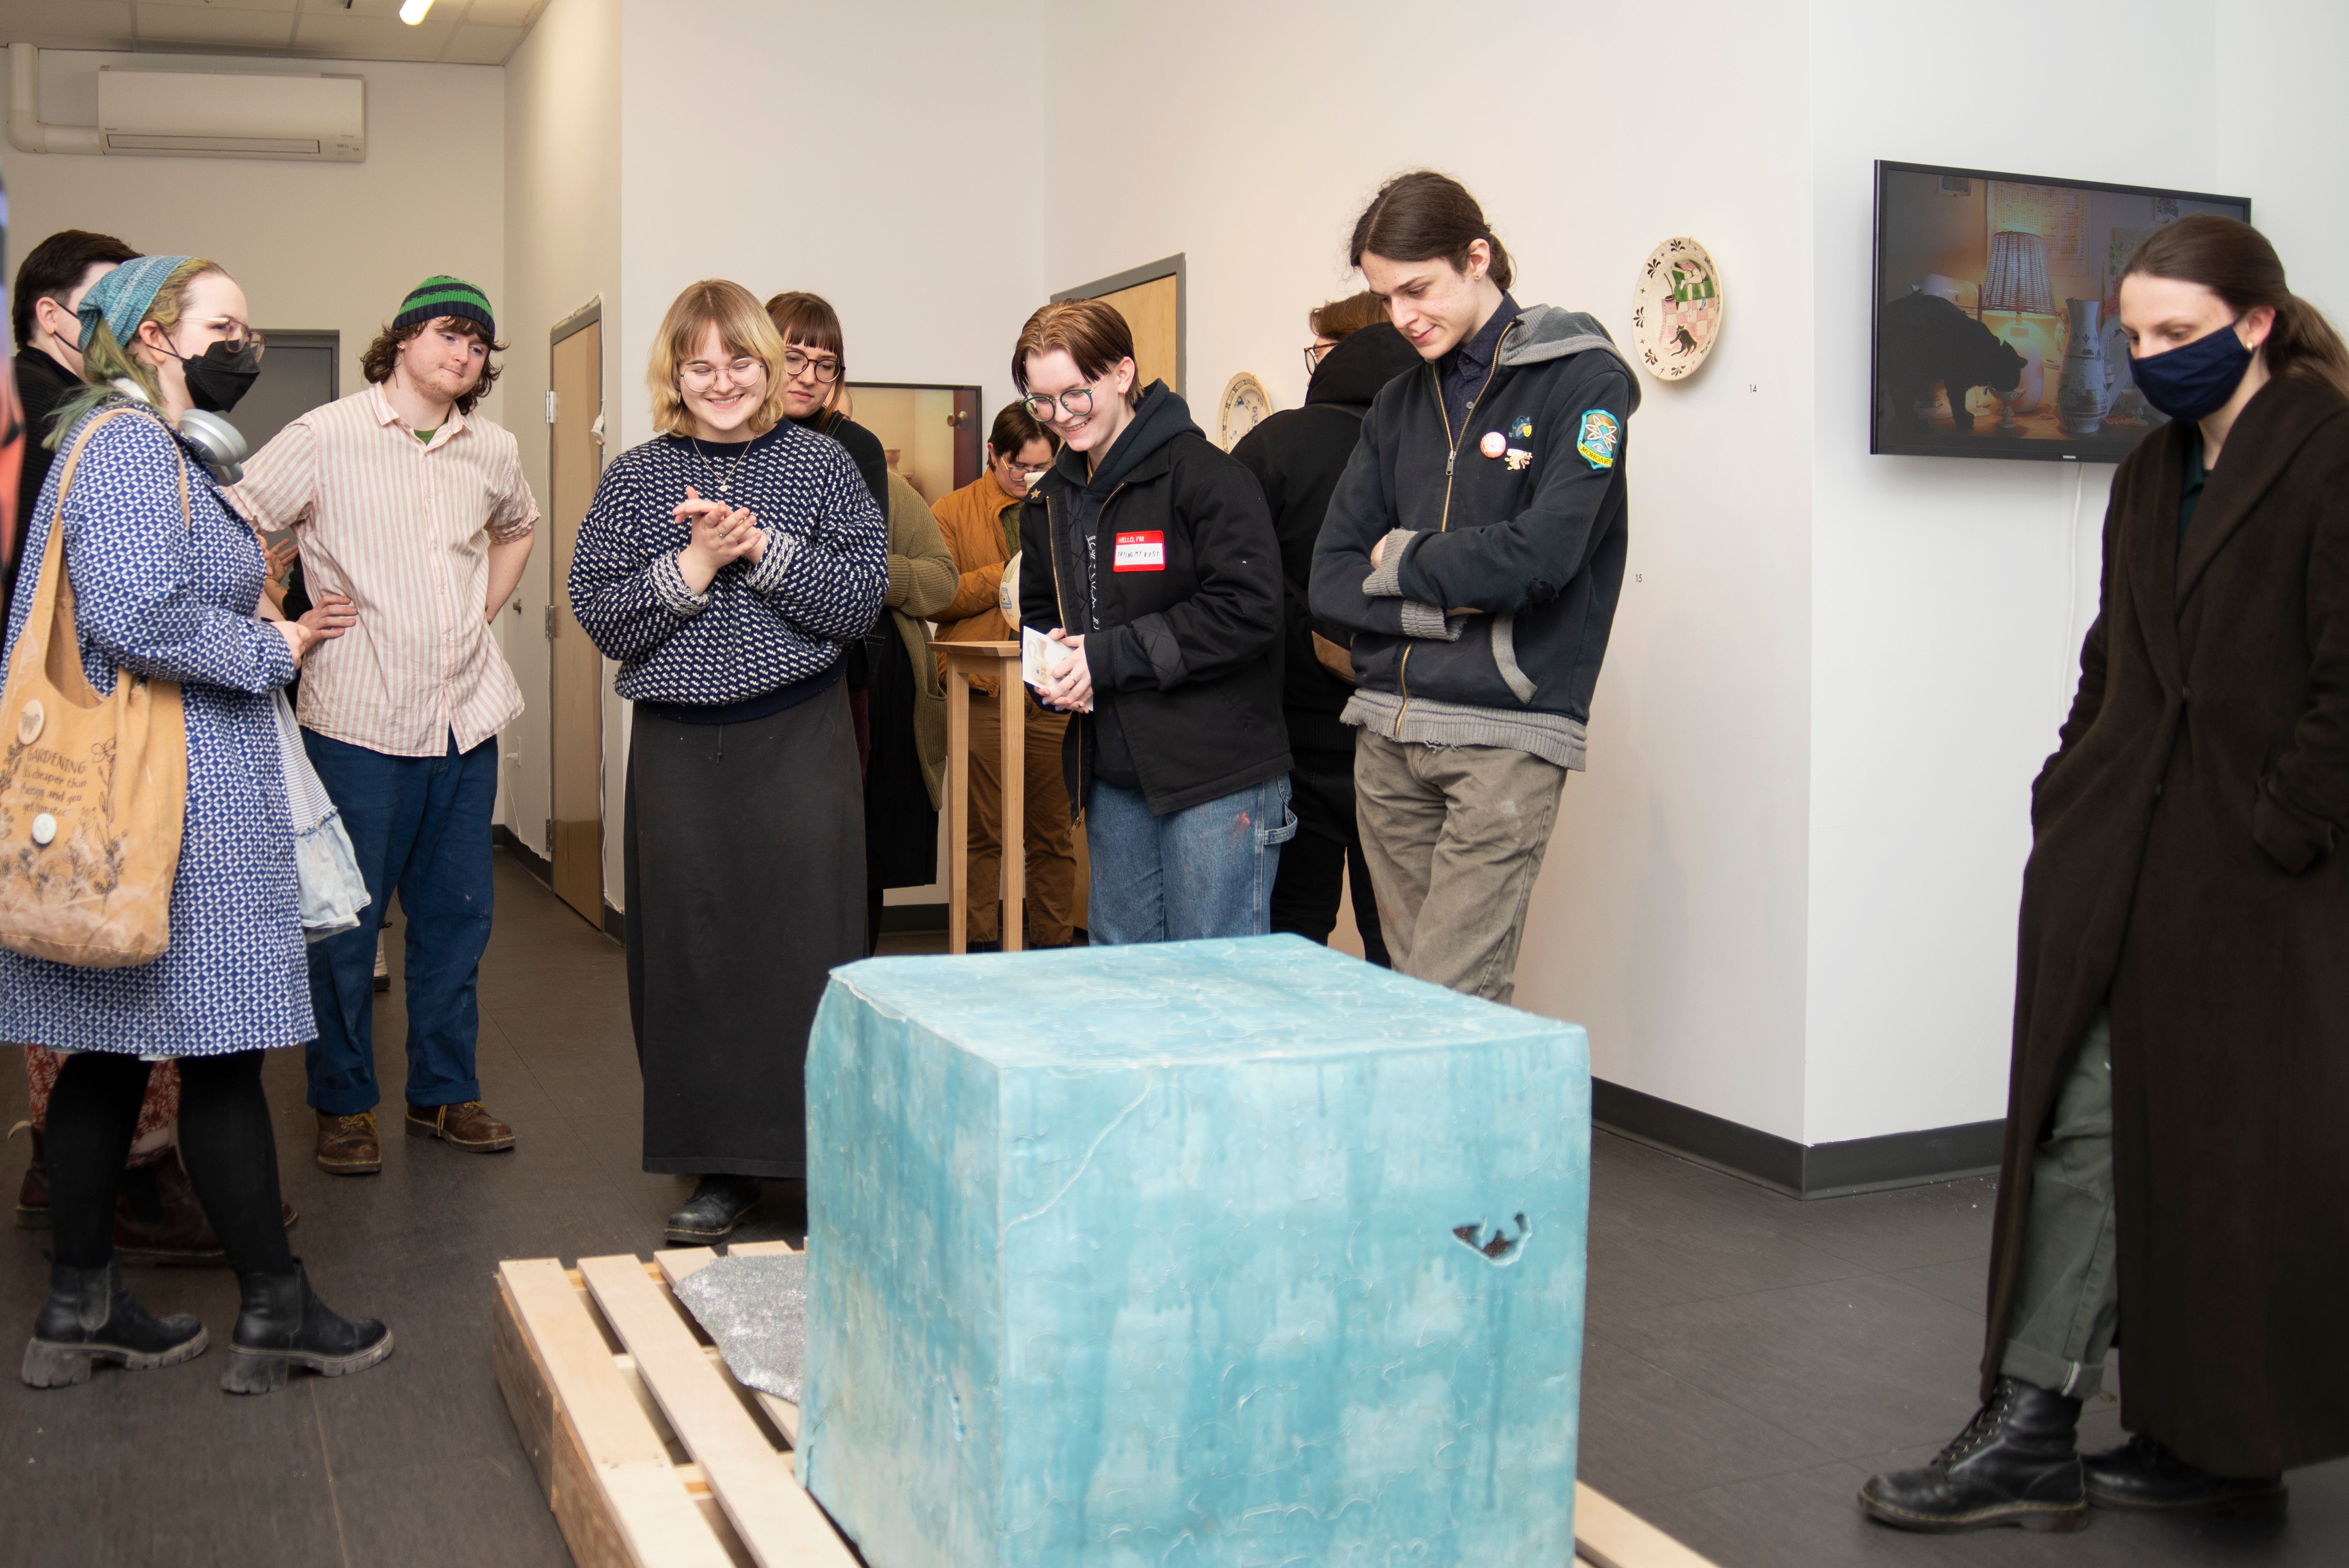 A crowd of people looking at a large blue ceramic cube in a gallery.